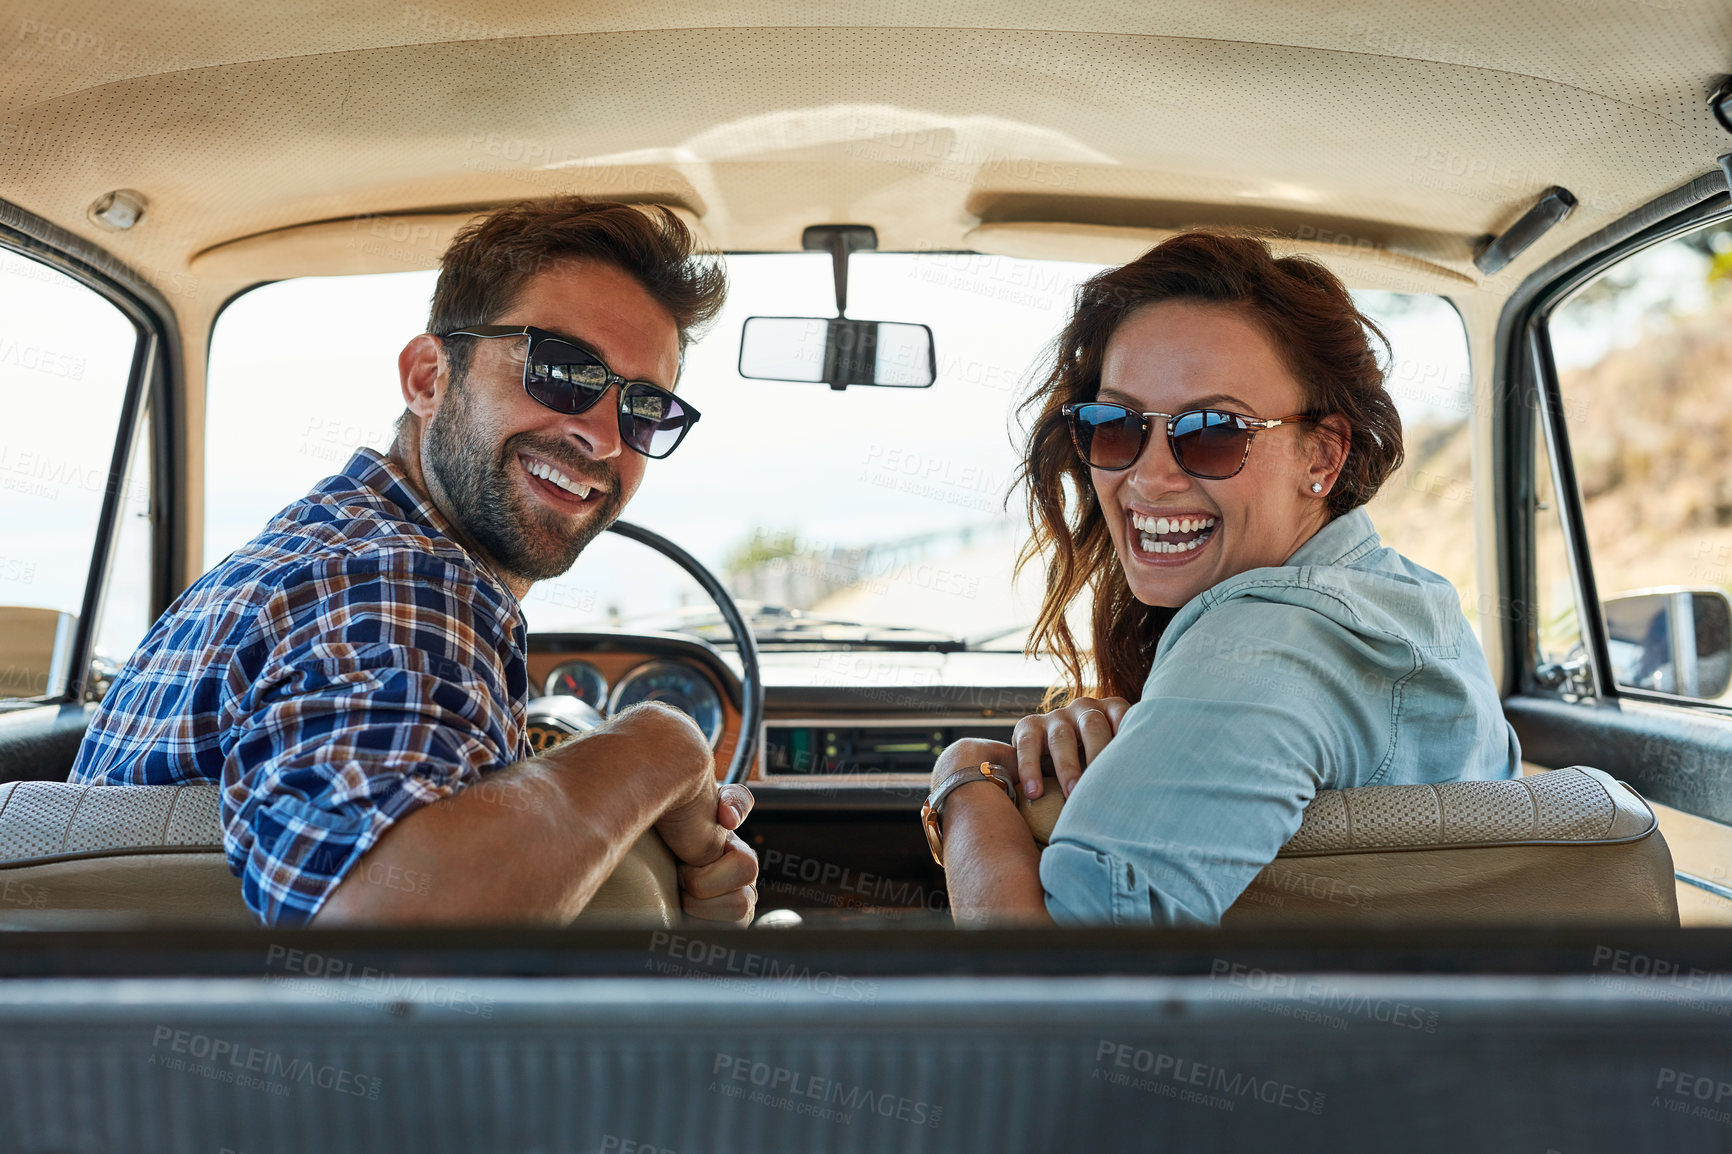 Buy stock photo Rearview portrait of an affectionate couple enjoying a summer road trip